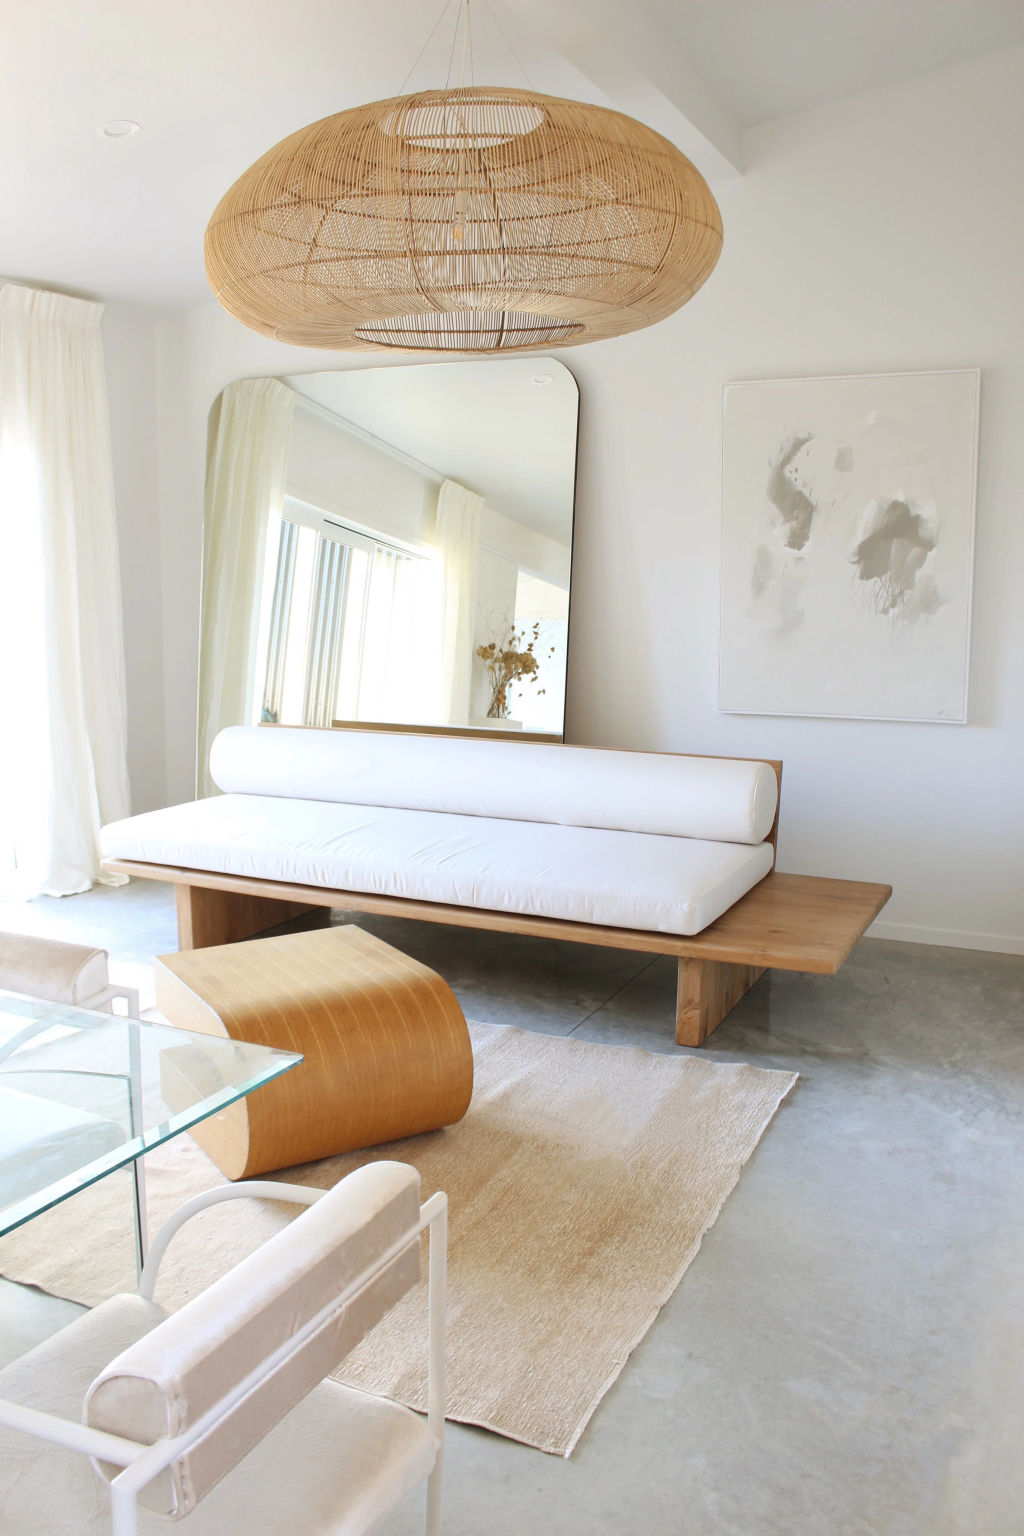 Low profile furniture is a feature of the Japandi style. Photo: Erena Te Paa